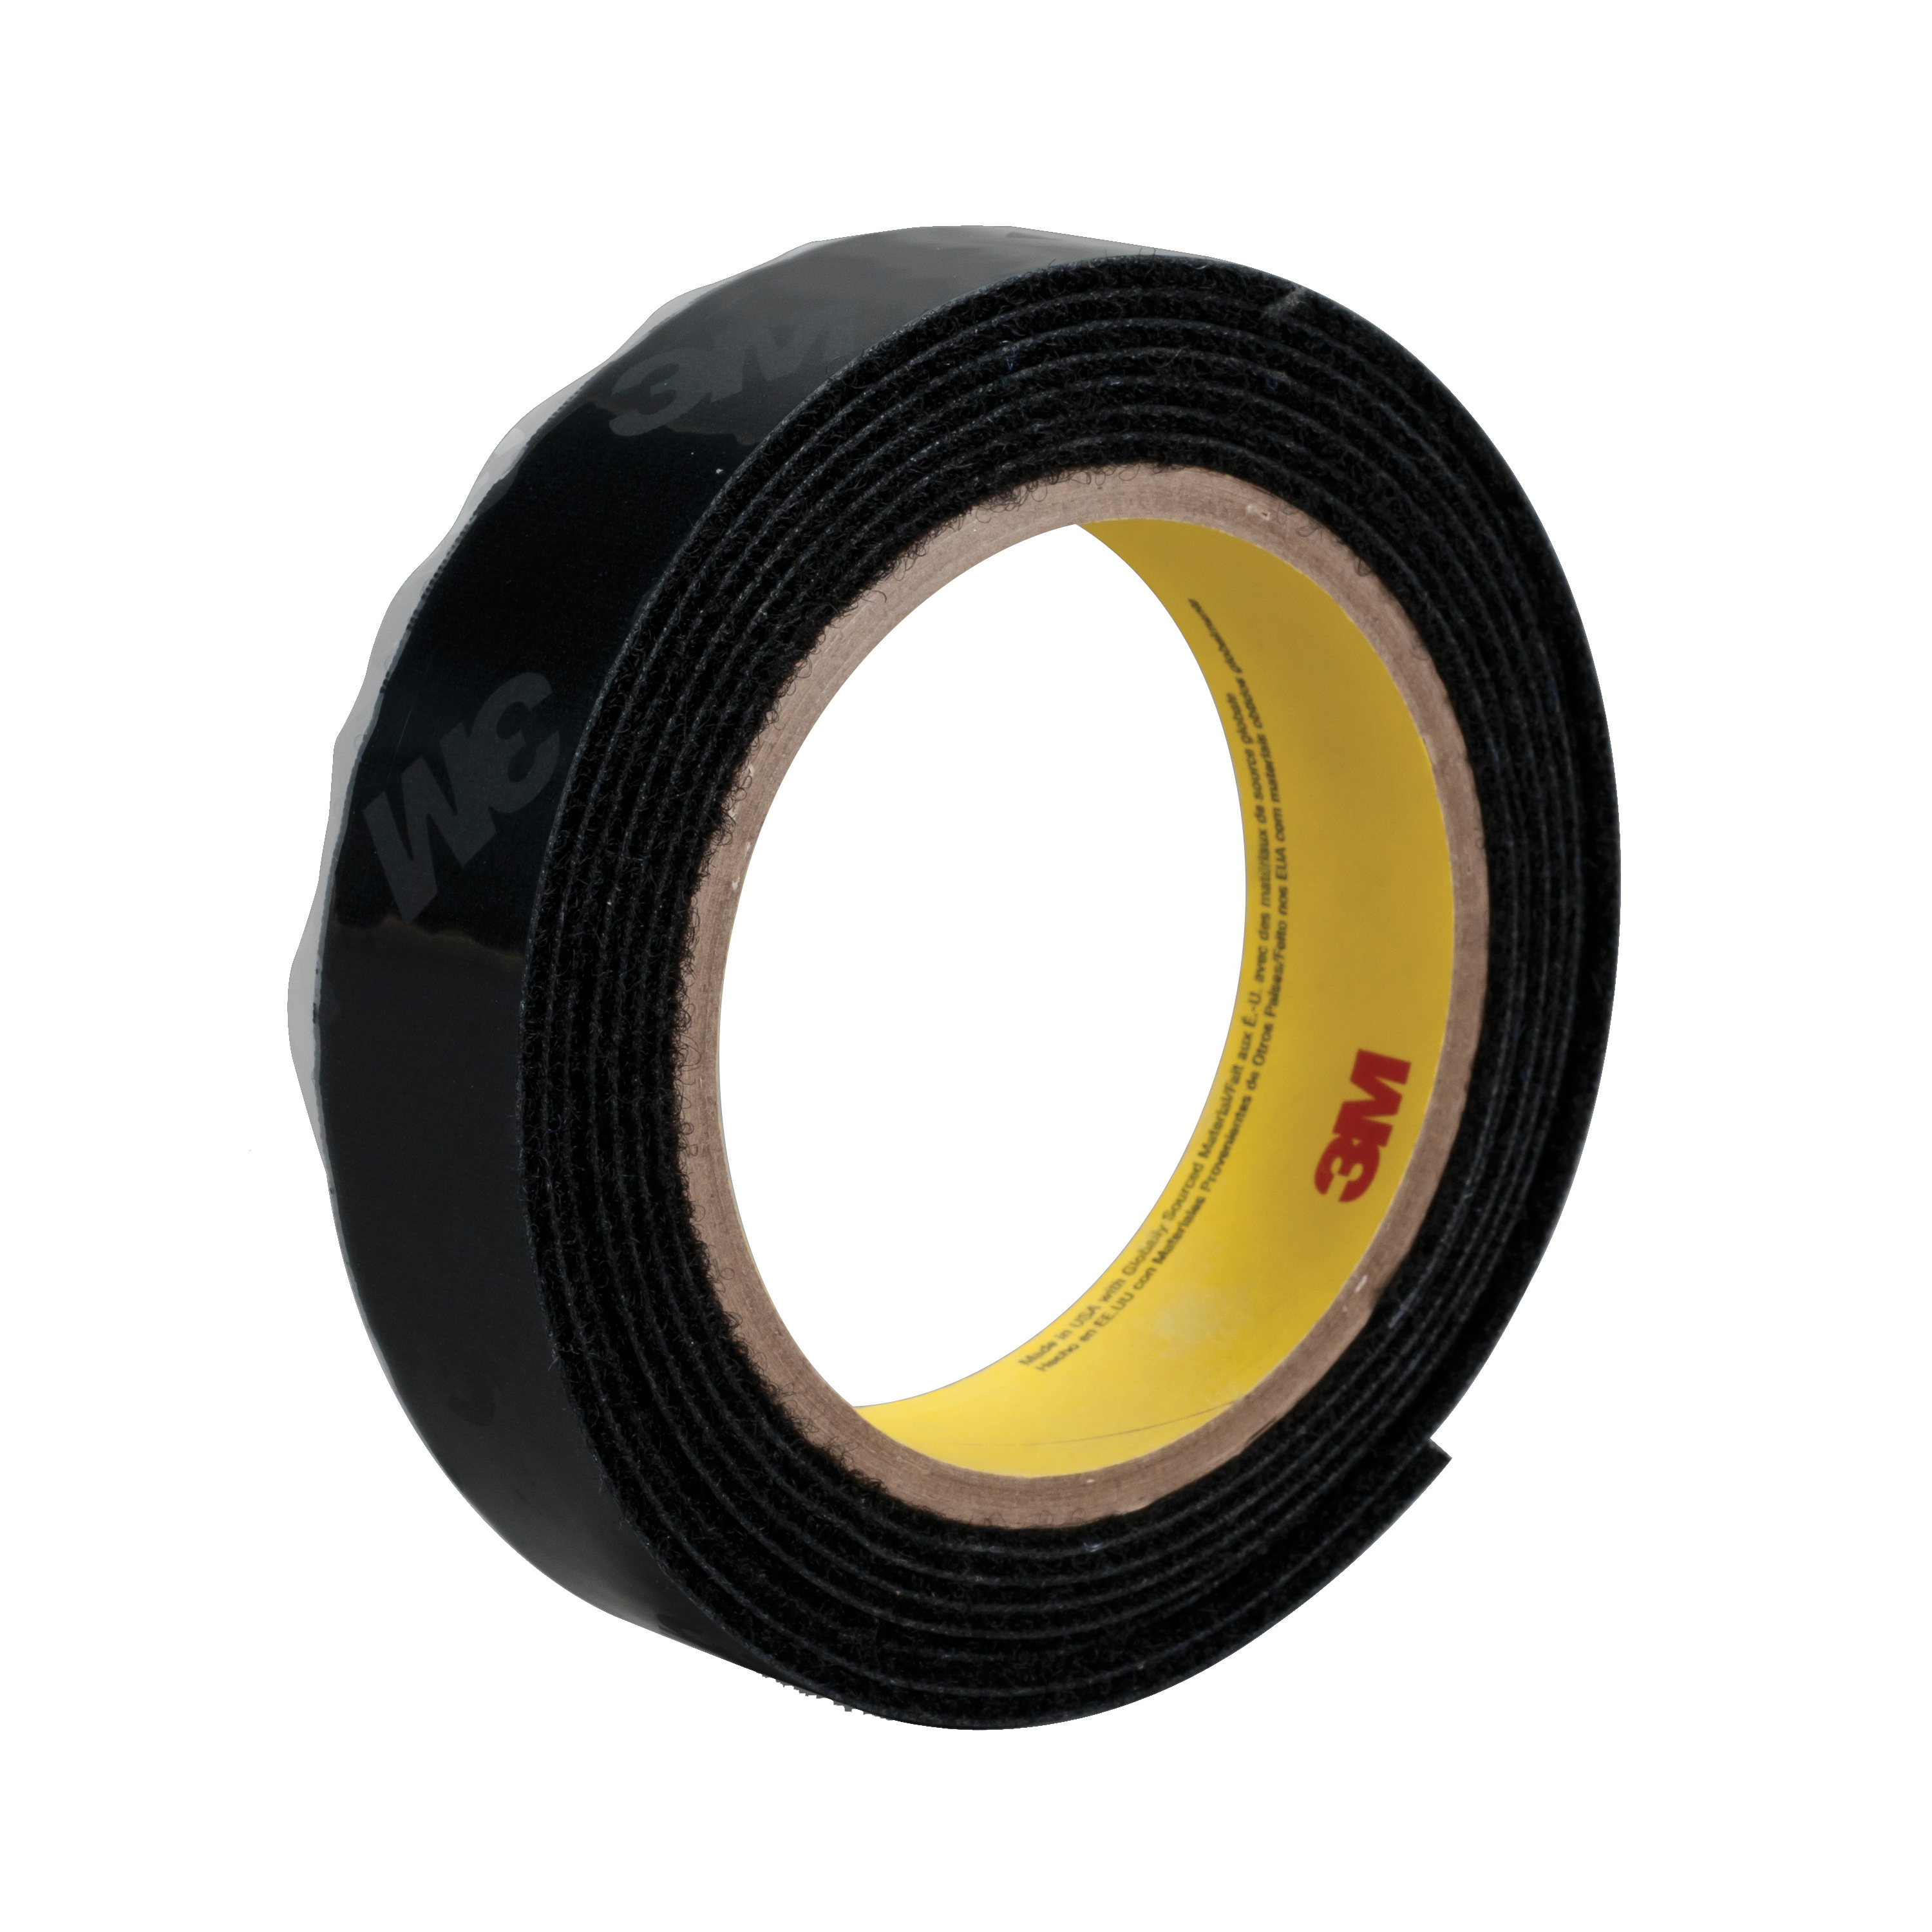 3M™ 021200-87385 Reclosable Loop Fastener Tape, 50 yd L x 3/4 in W, 0.15 in THK Engaged, High Performance Acrylic PSA Adhesive, Woven Nylon Backing, Black